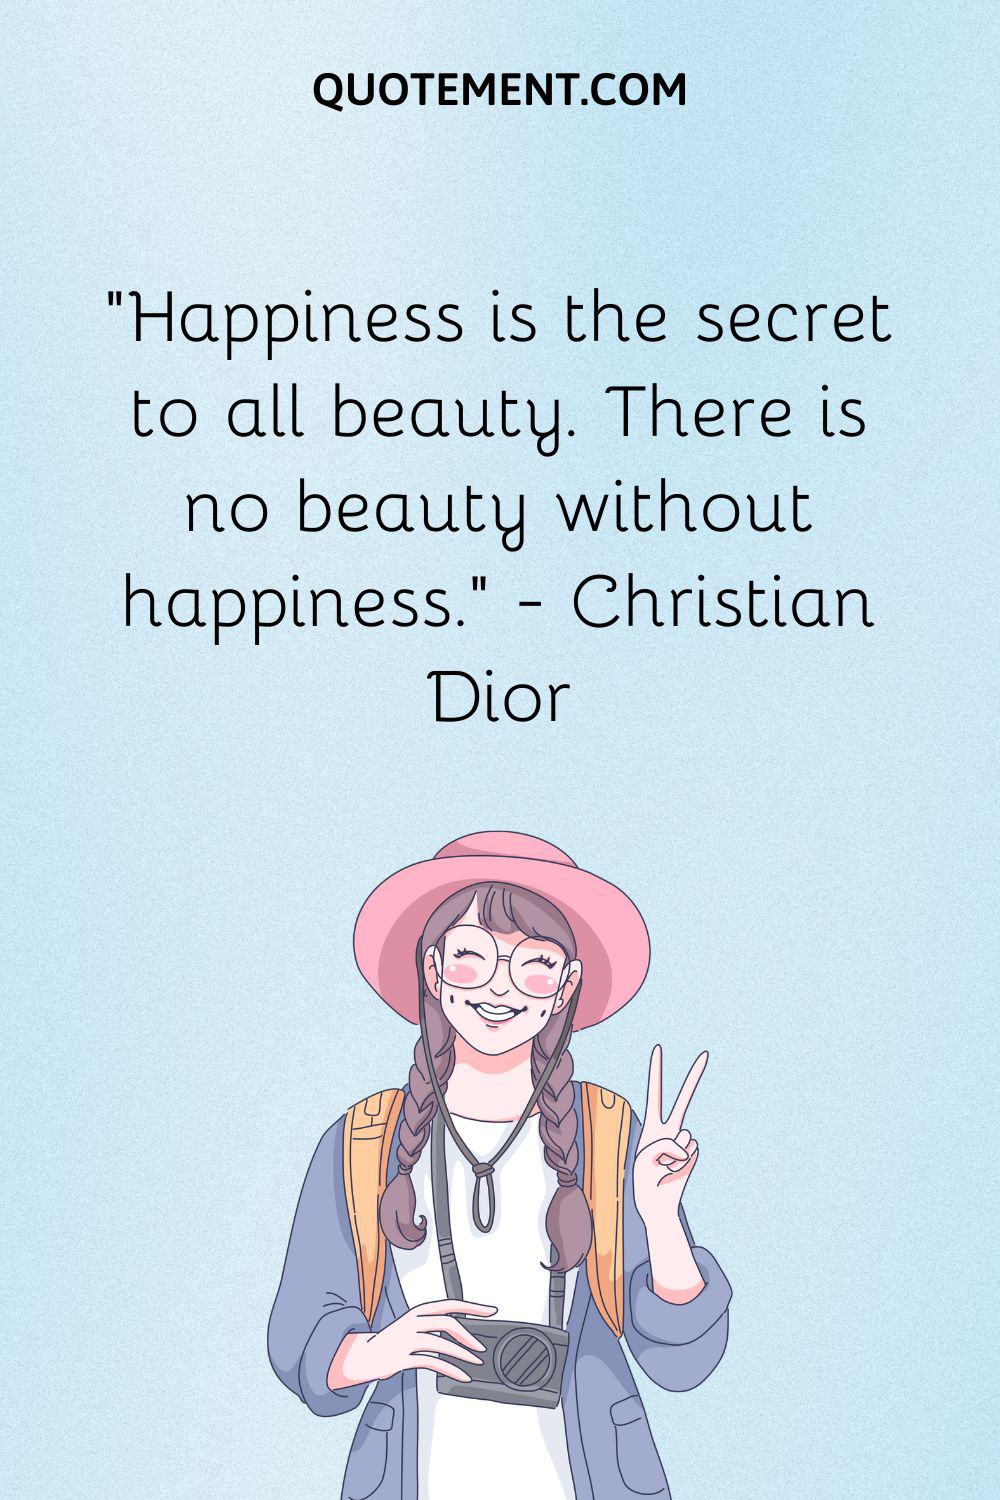 “Happiness is the secret to all beauty